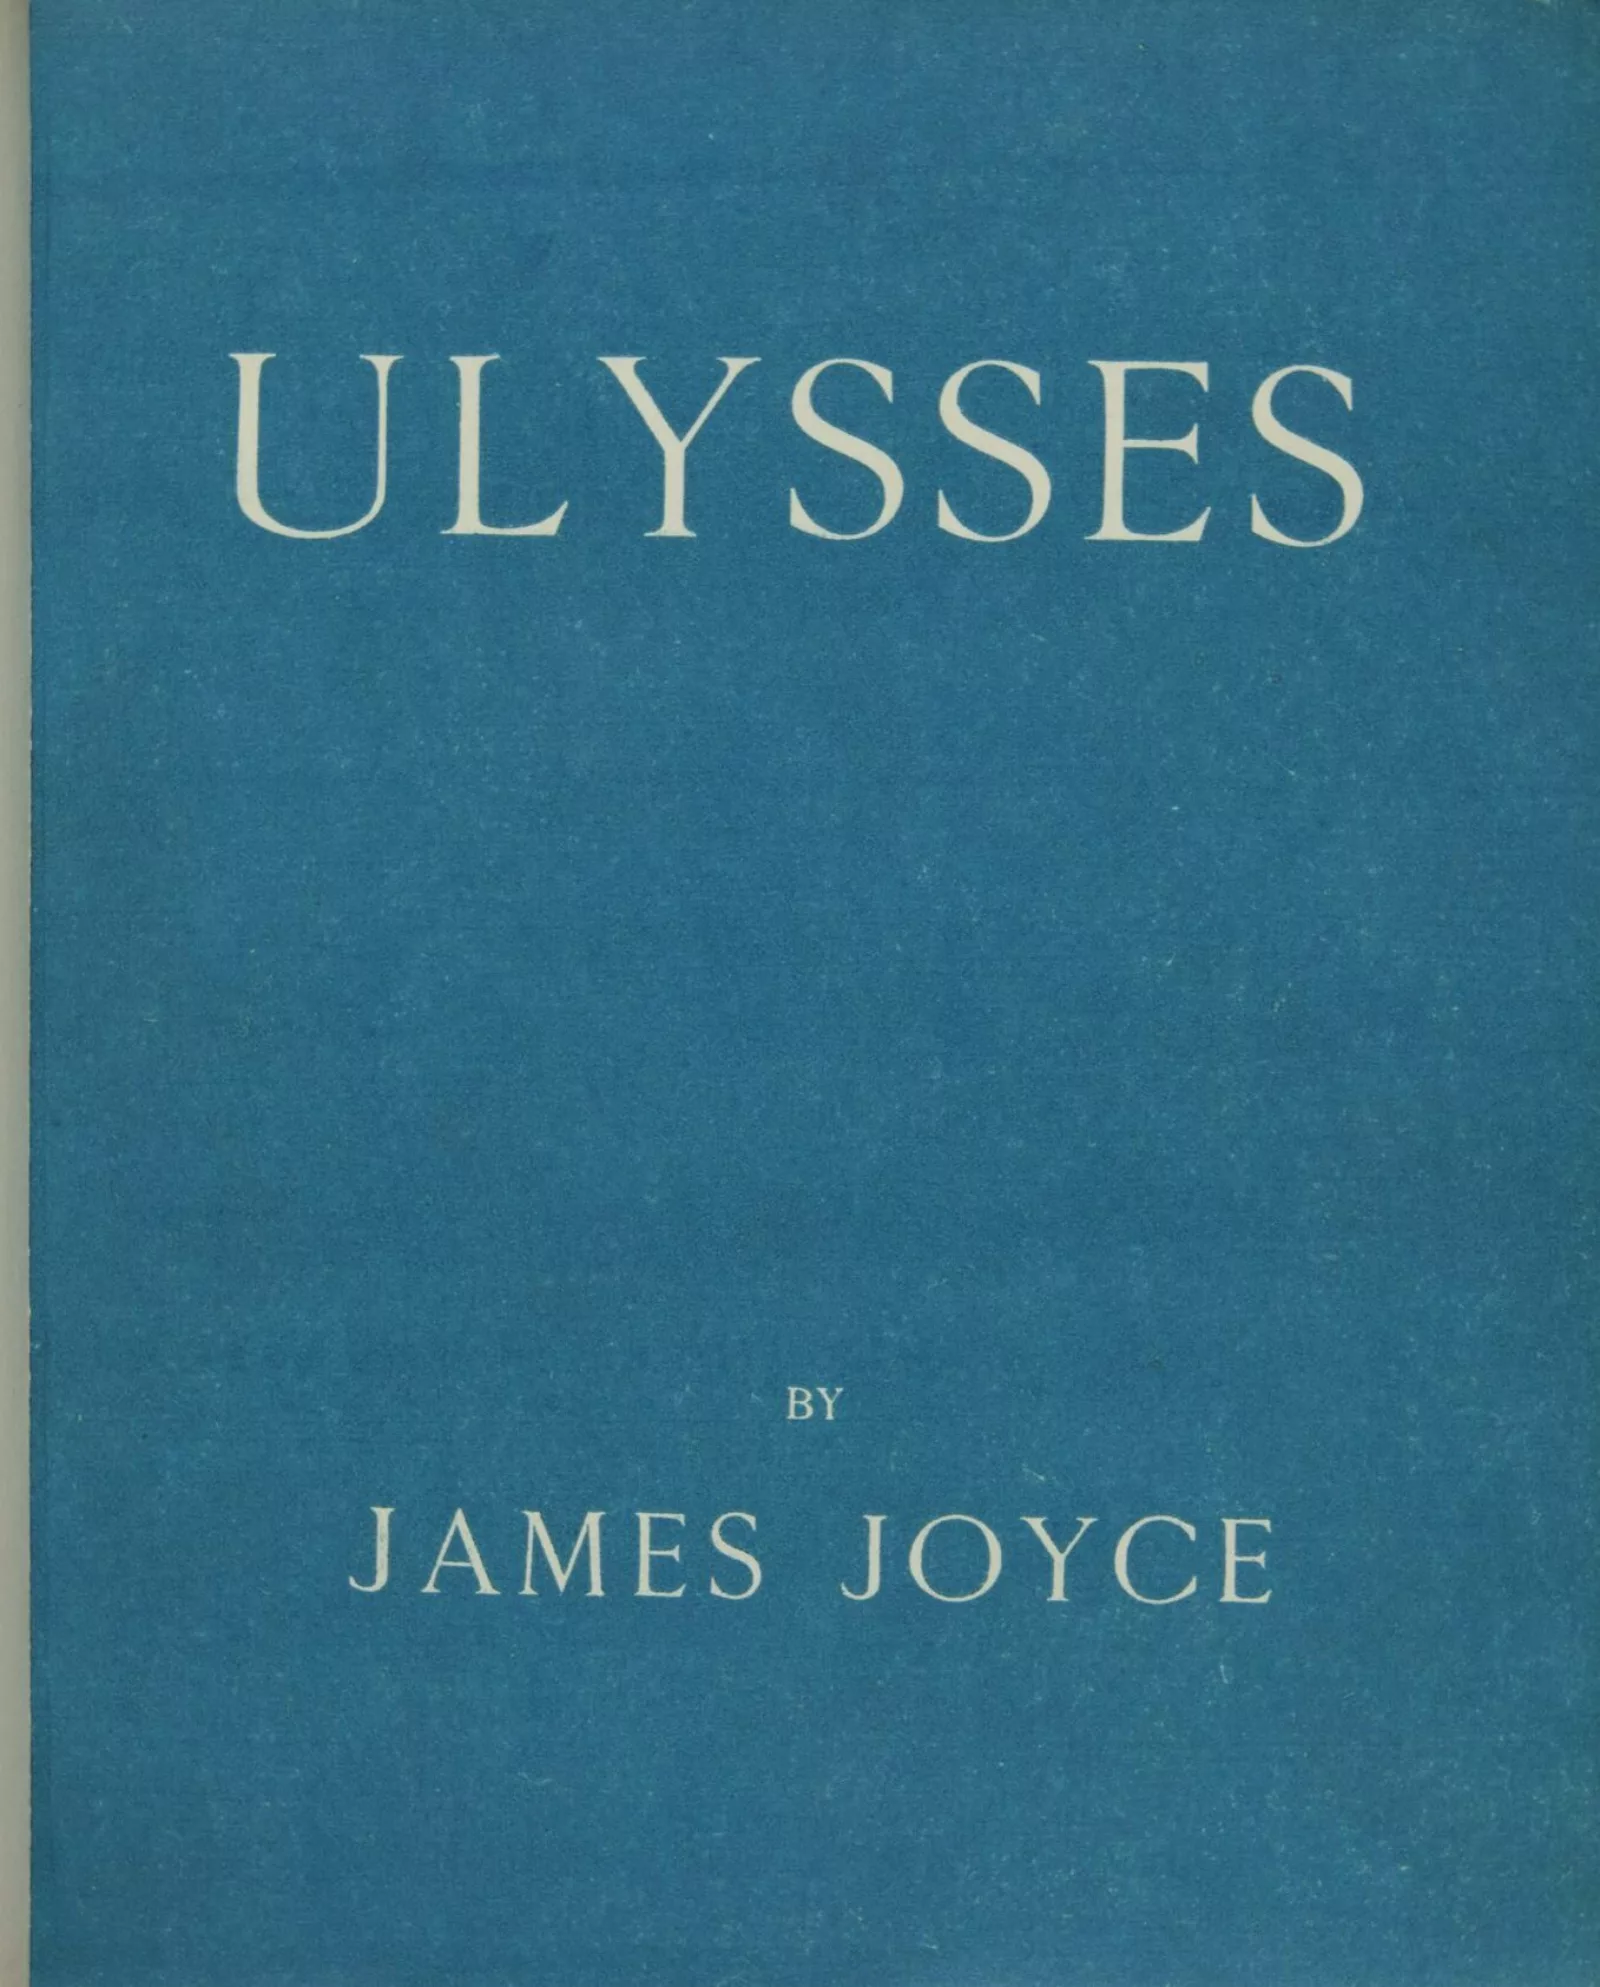 The first edition of Ulysses had a bare-bones cover design. The words "Ulysses by James Joyce" appear in white letters against a blue background.